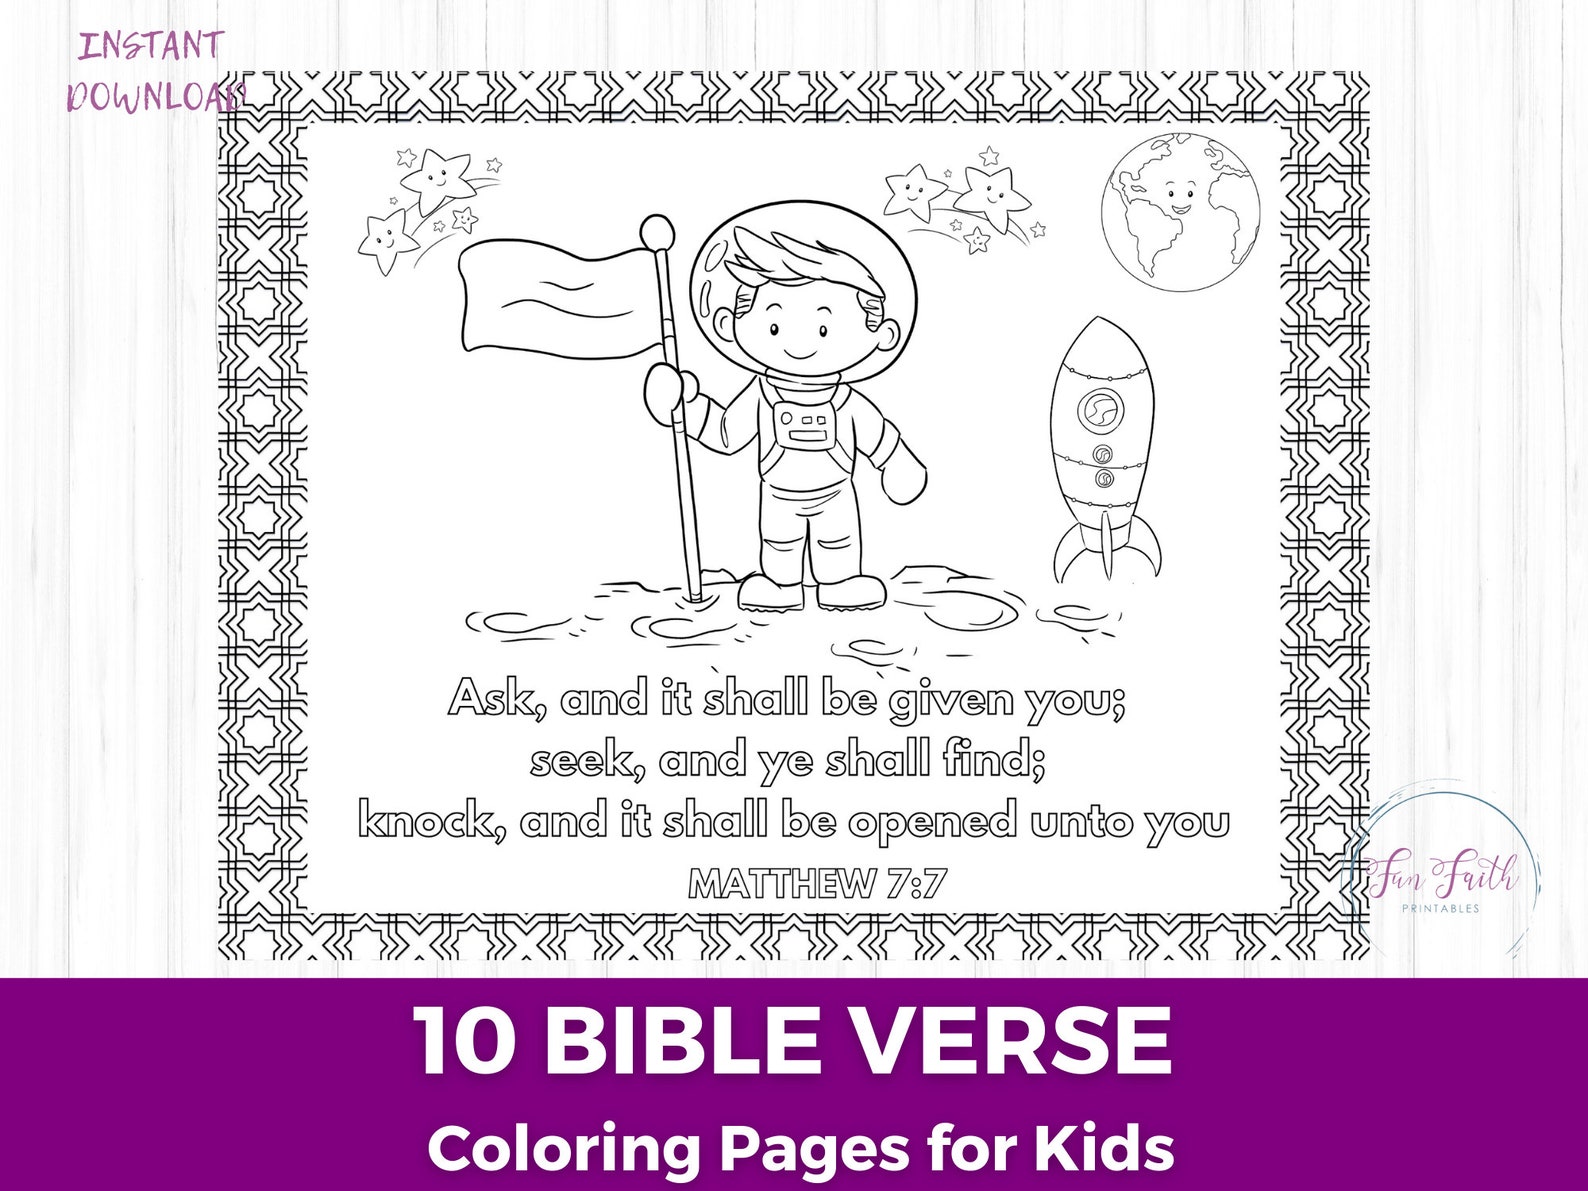 Scripture Coloring Pages Bible Verse Coloring Pages Sunday School